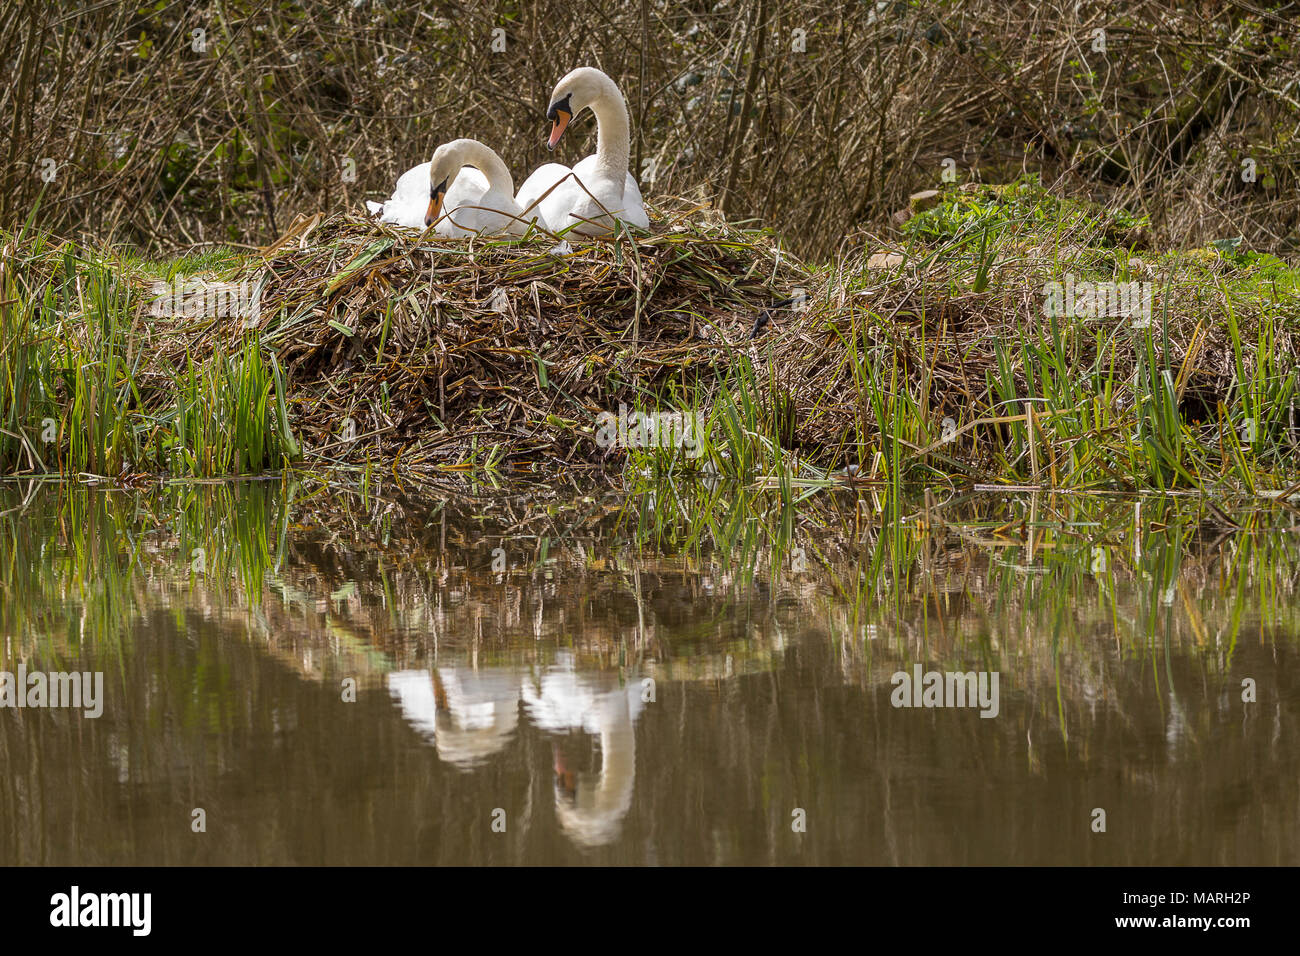 Mute swans (Cygnus olor) building a nest at the lakeside.The male and female build the nest together with the male collecting and passing material.  . Stock Photo